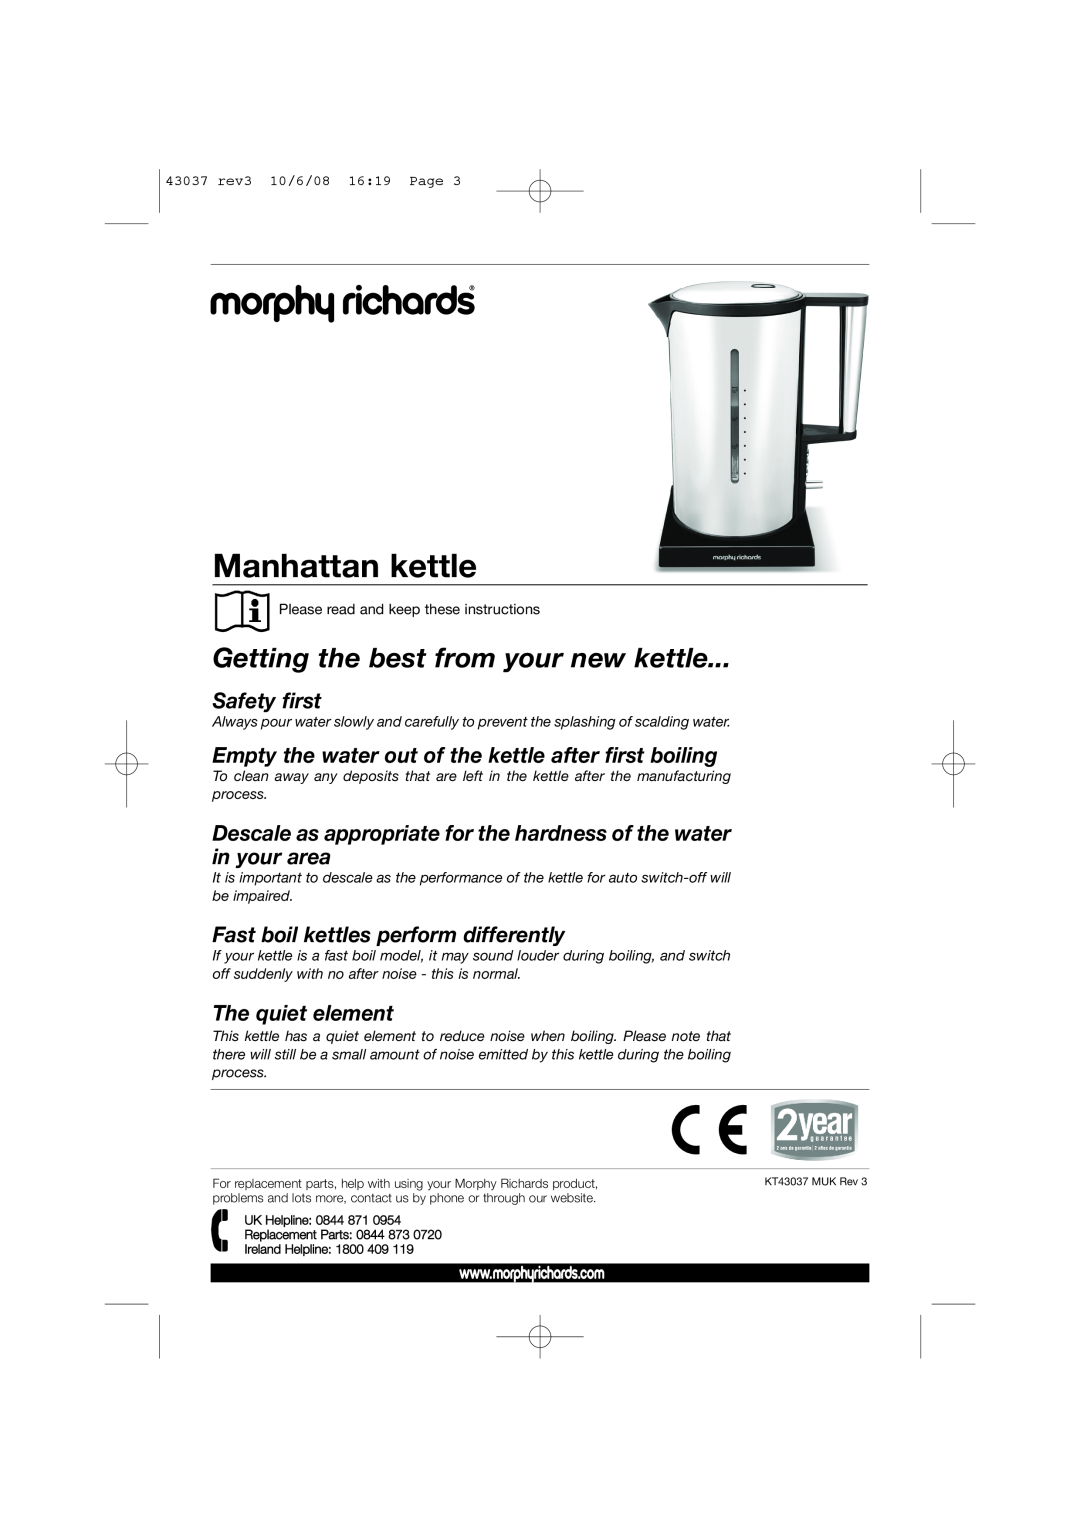 Morphy Richards 43037 warranty Manhattan kettle, Getting the best from your new kettle, Safety first, The quiet element 